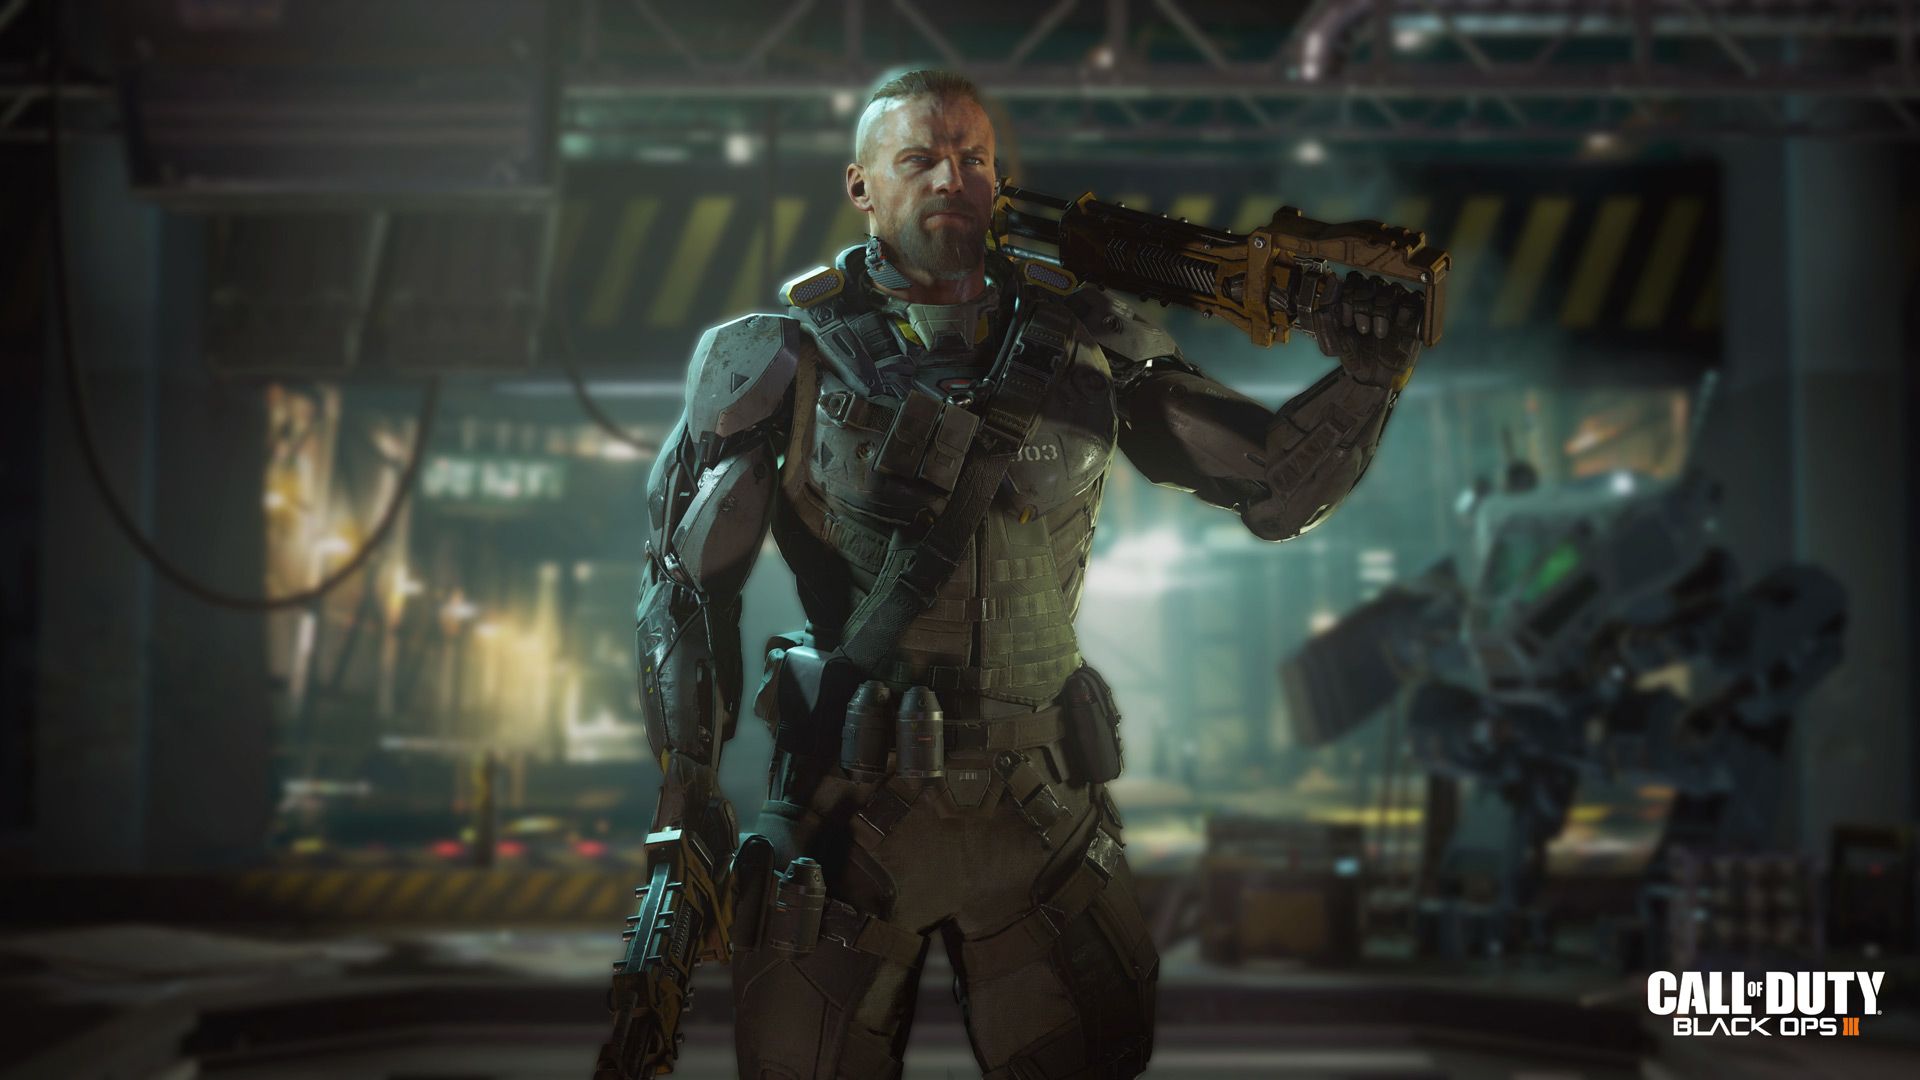 Call Of Duty Black Ops 3 Live On Playstation 4 Treyarch Offers Tips